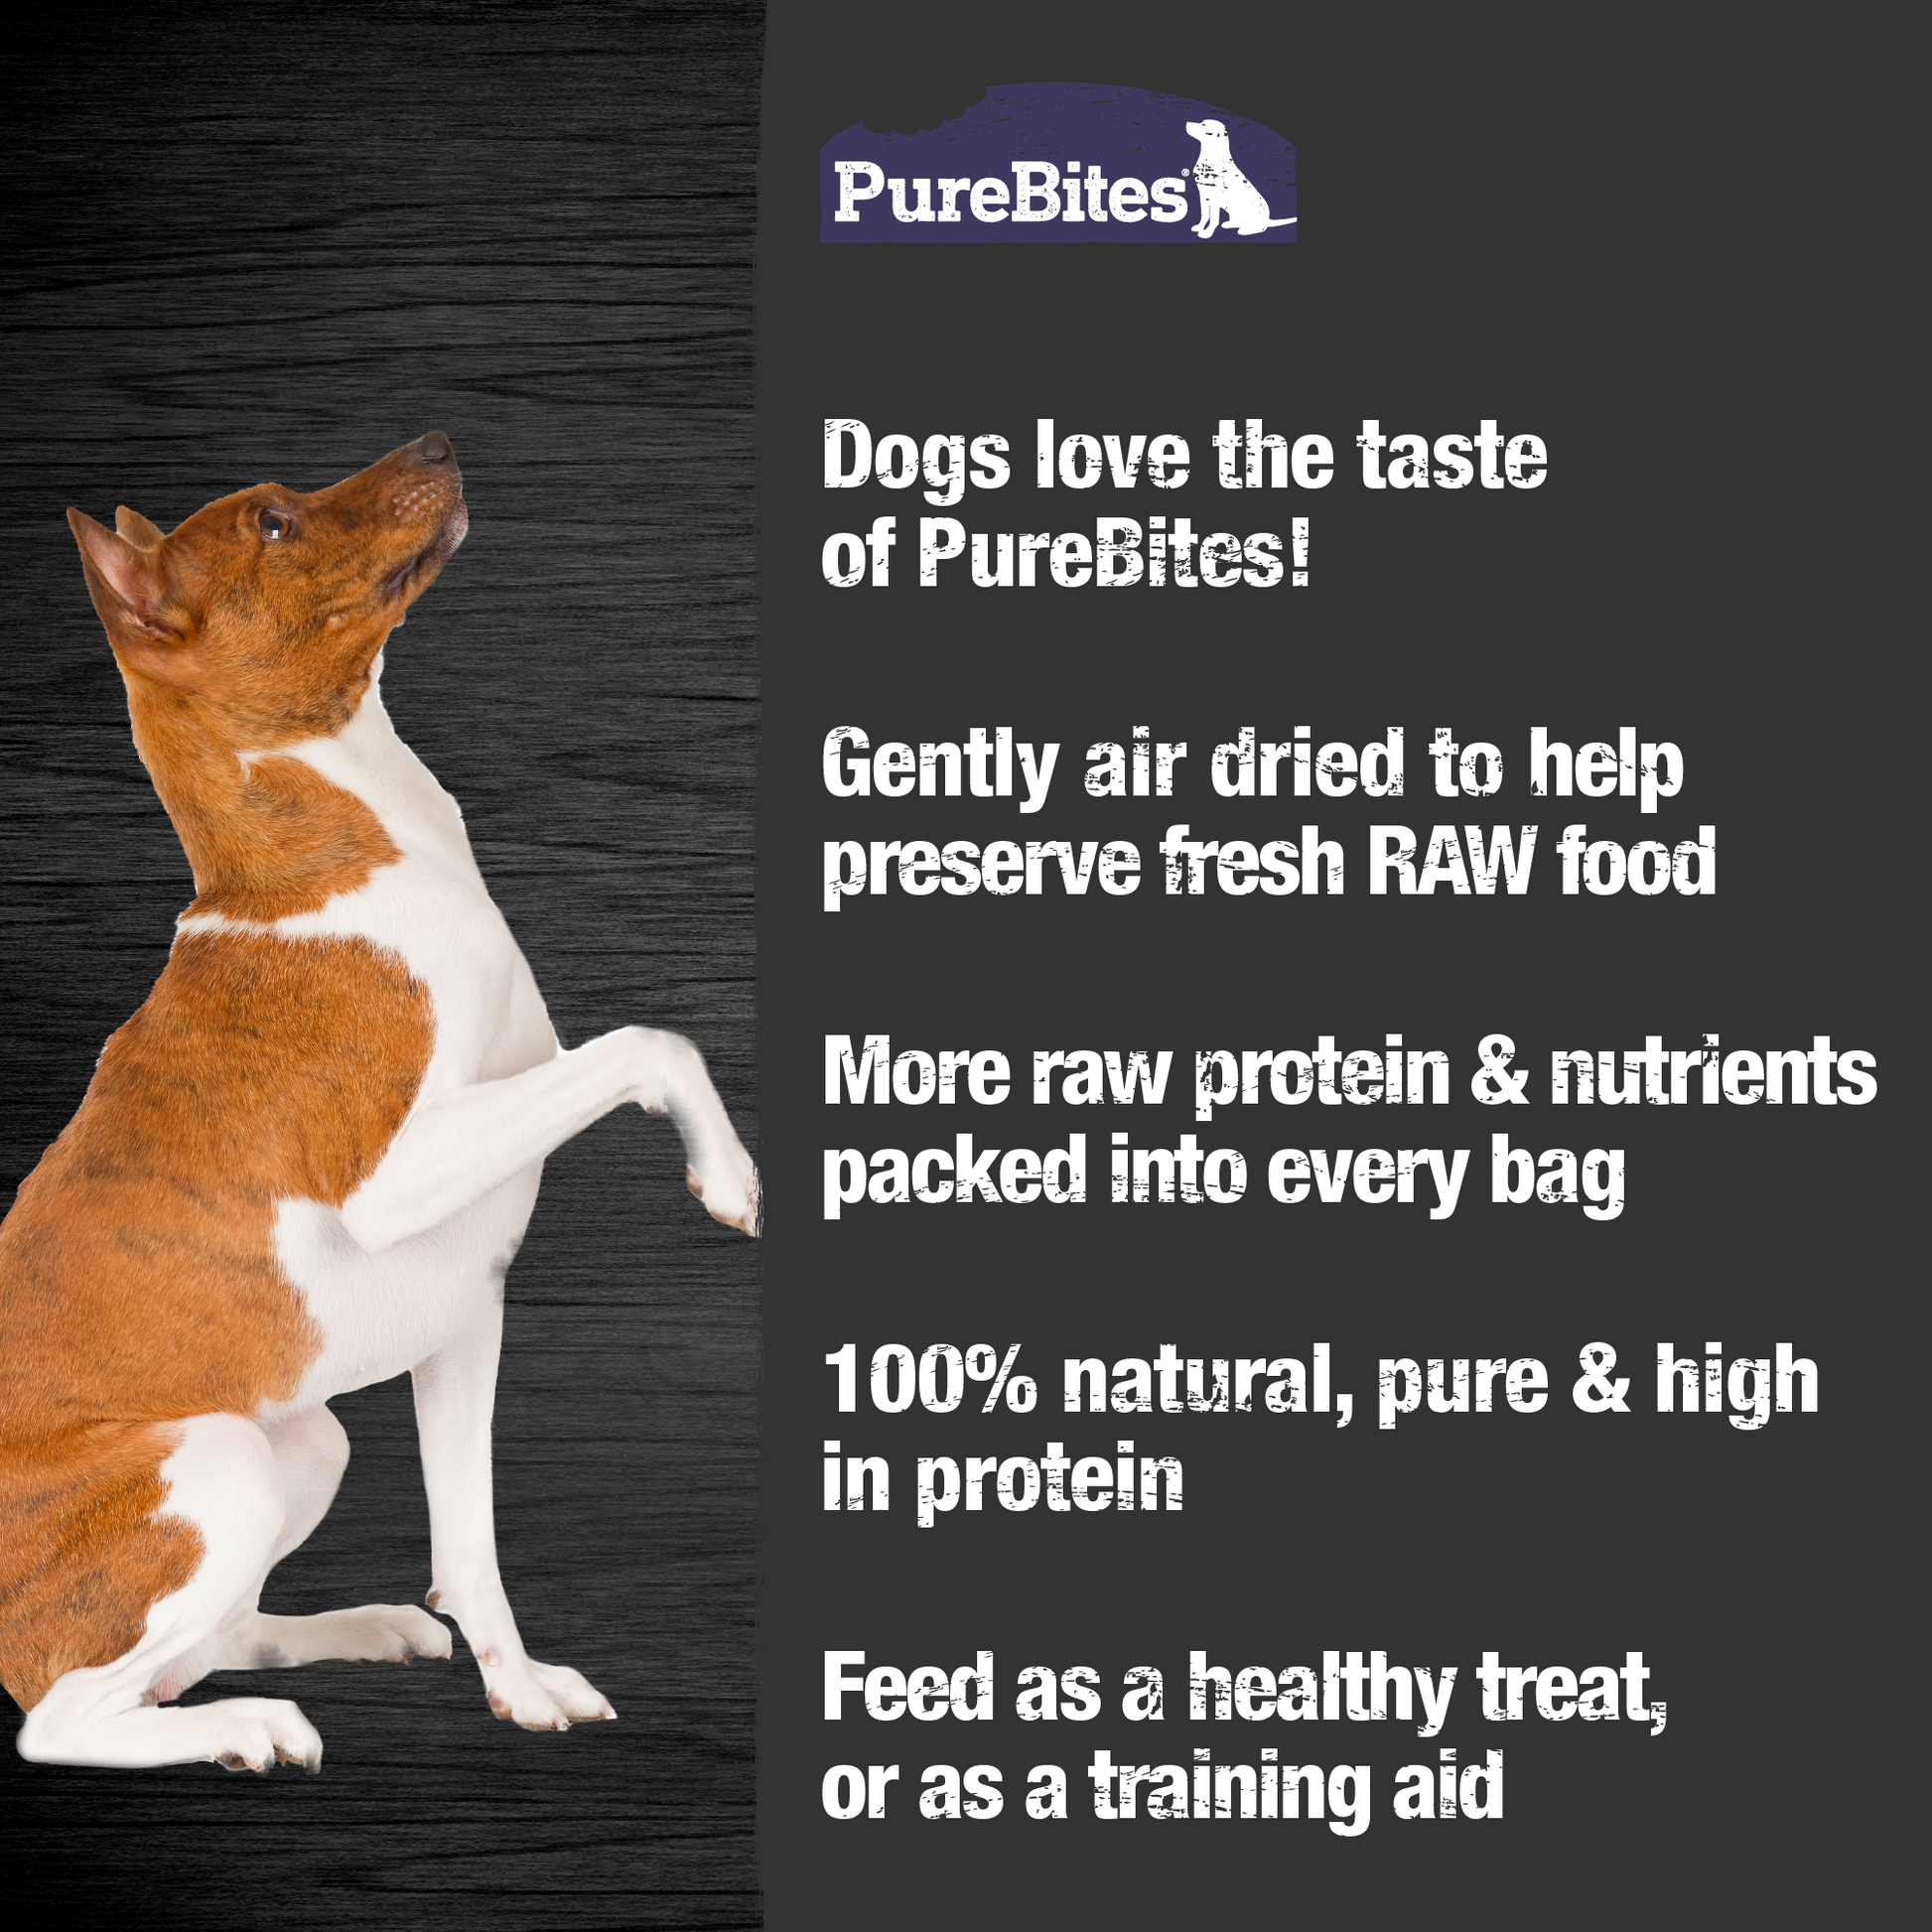 Made fresh & pure means more RAW protein and nutrients packed into every bag. Our chicken & sweet potato jerky is delicately air dried to help preserve its RAW taste, and nutrition, and mirror a dog’s ancestral diet.